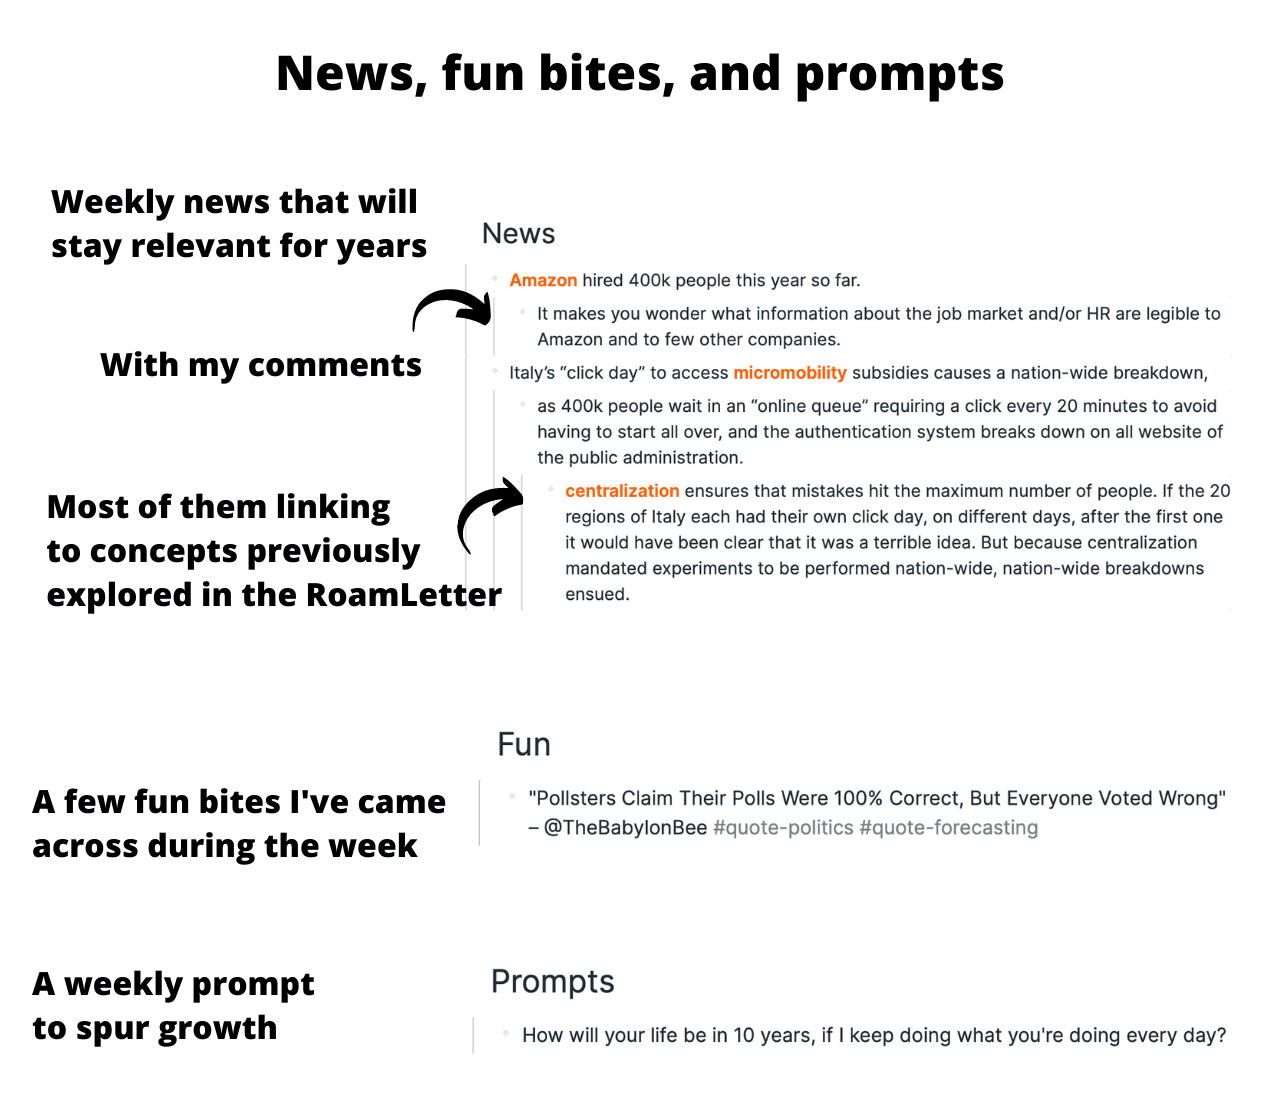 The RoamLetter contains news, fun bites, and prompts